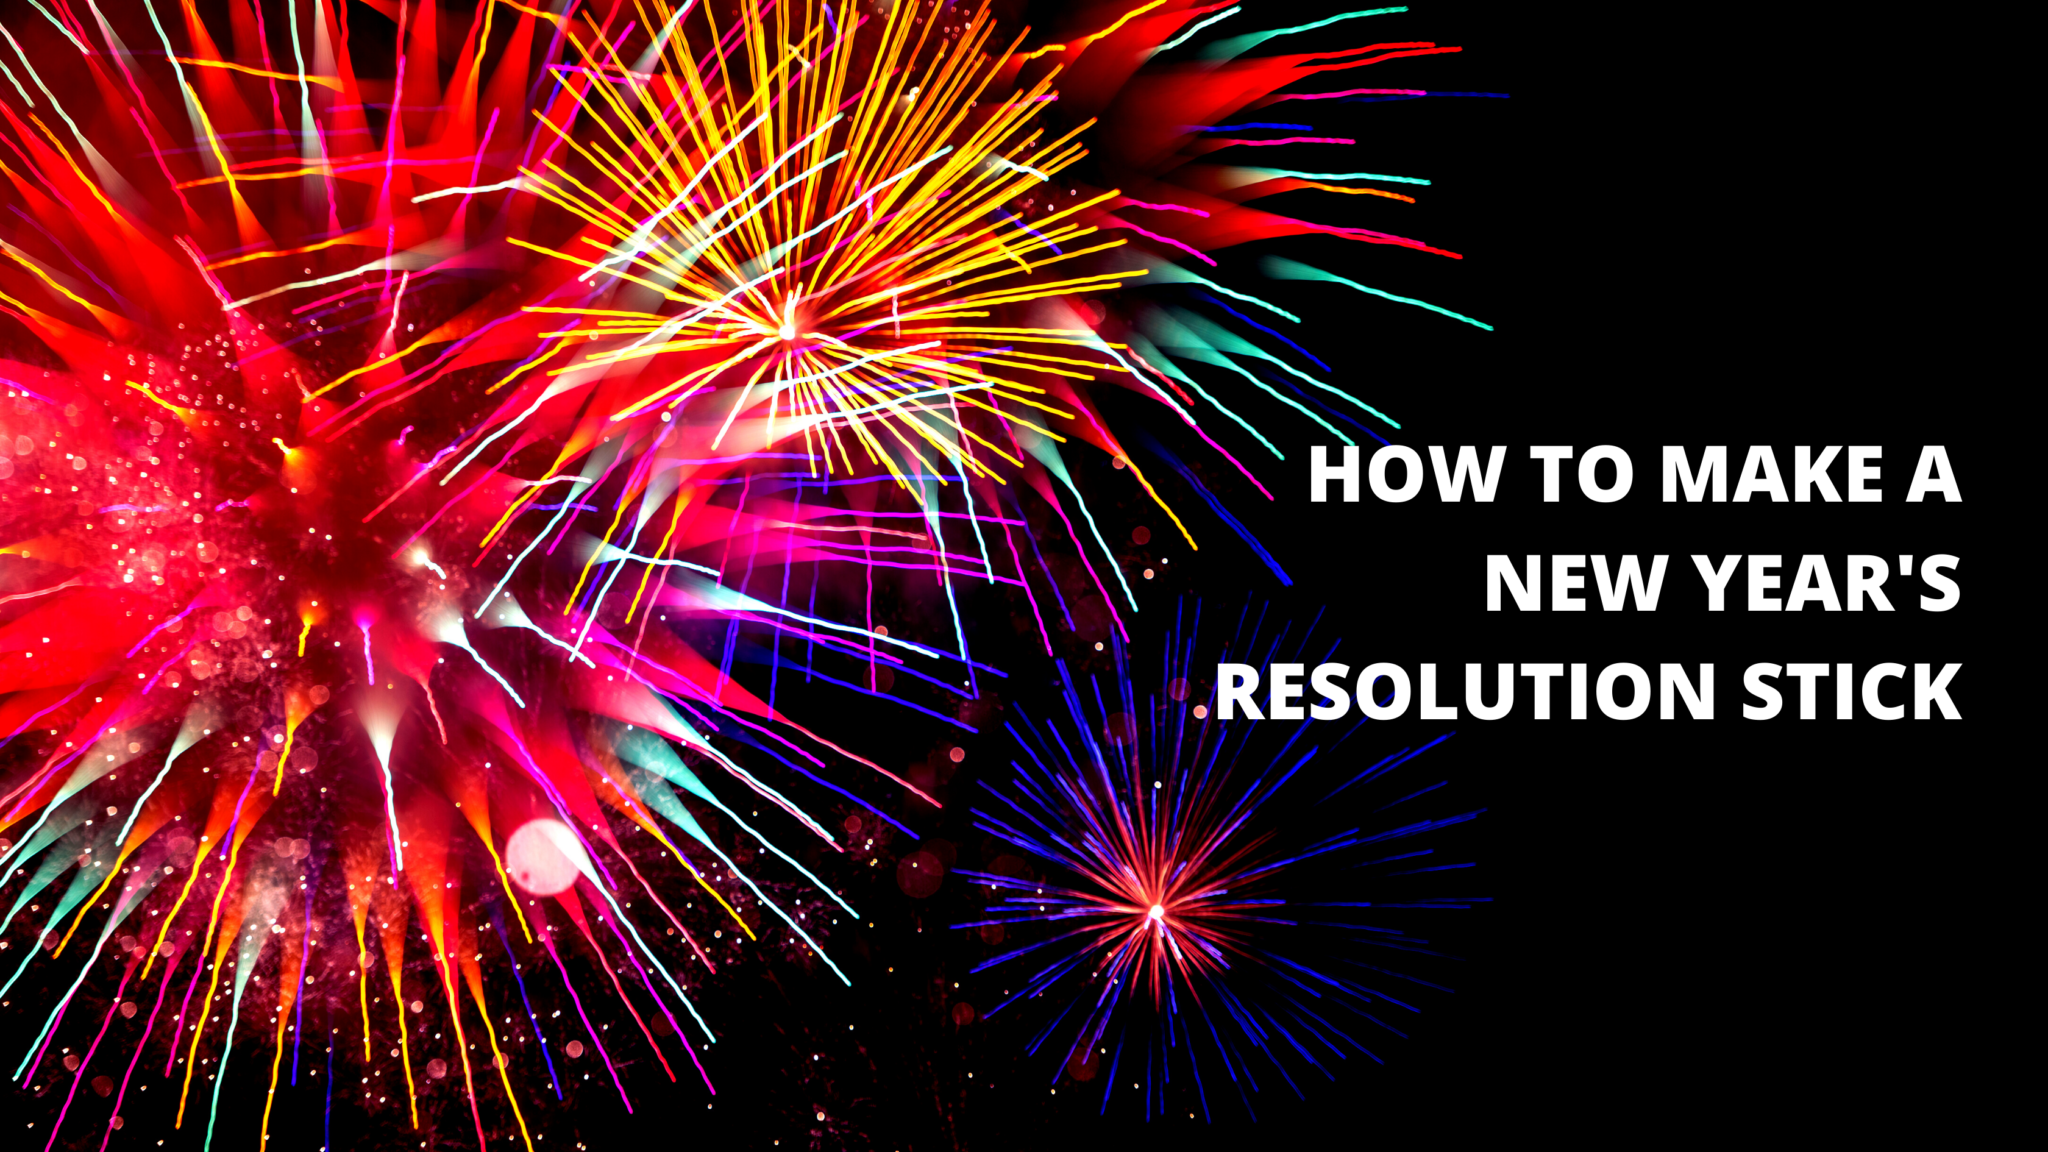 how to make new year's resolutions that stick